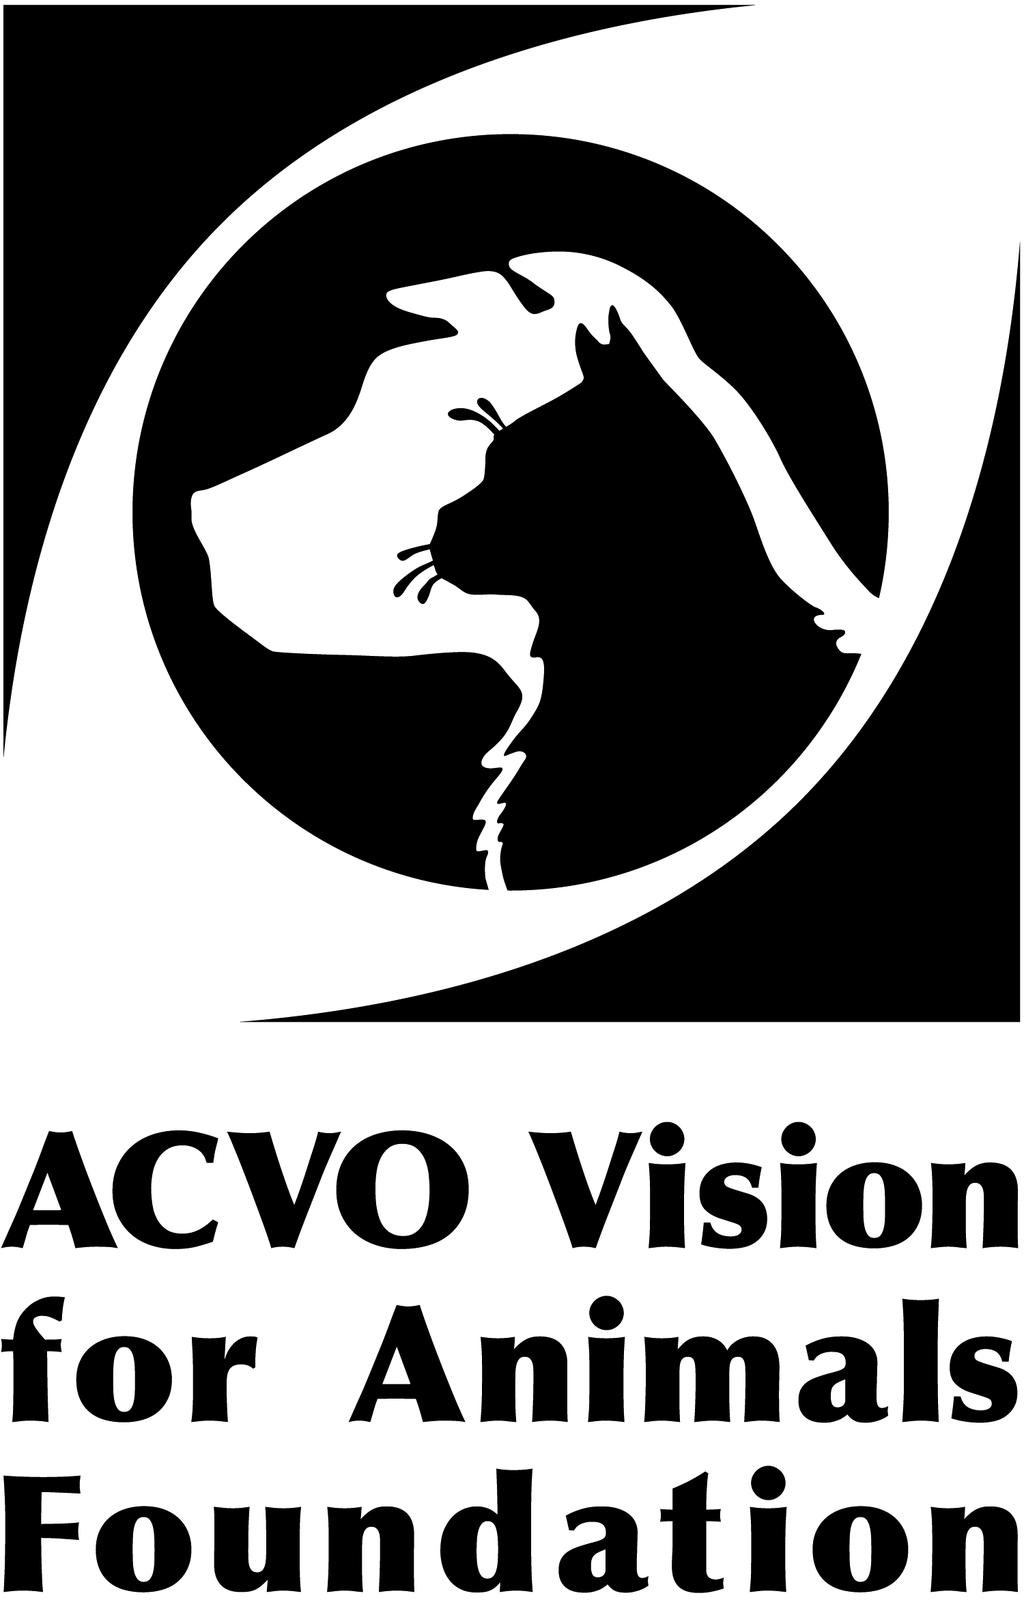 2018 Grant Announcement & Grant Instructions Form Invitation for Founders Clinical Research Grant The ACVO Vision for Animals Foundation (VAF) will offer one Founders Clinical Research grant to a